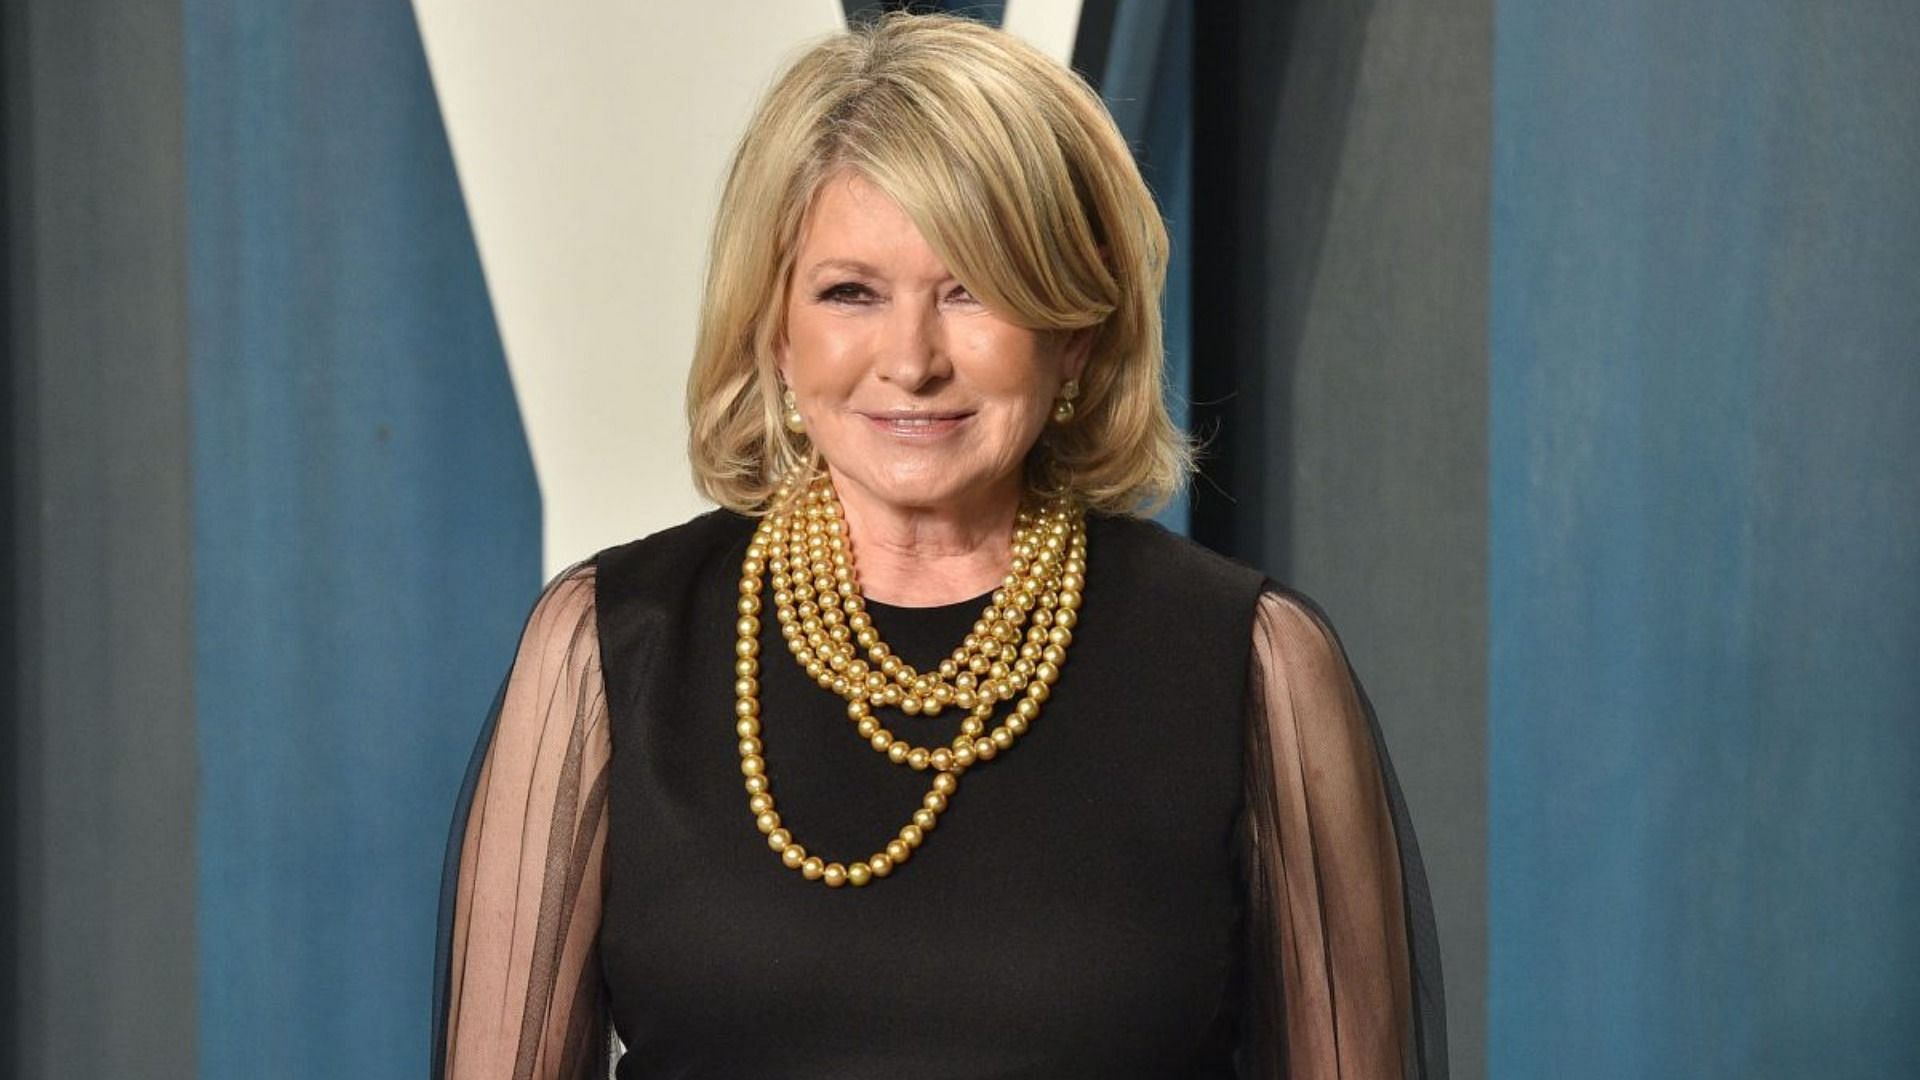 Martha Stewart wrote that her Great American Tag Sale would have something for everyone (Image via Getty Images/David Crotty/Patrick McMullan)